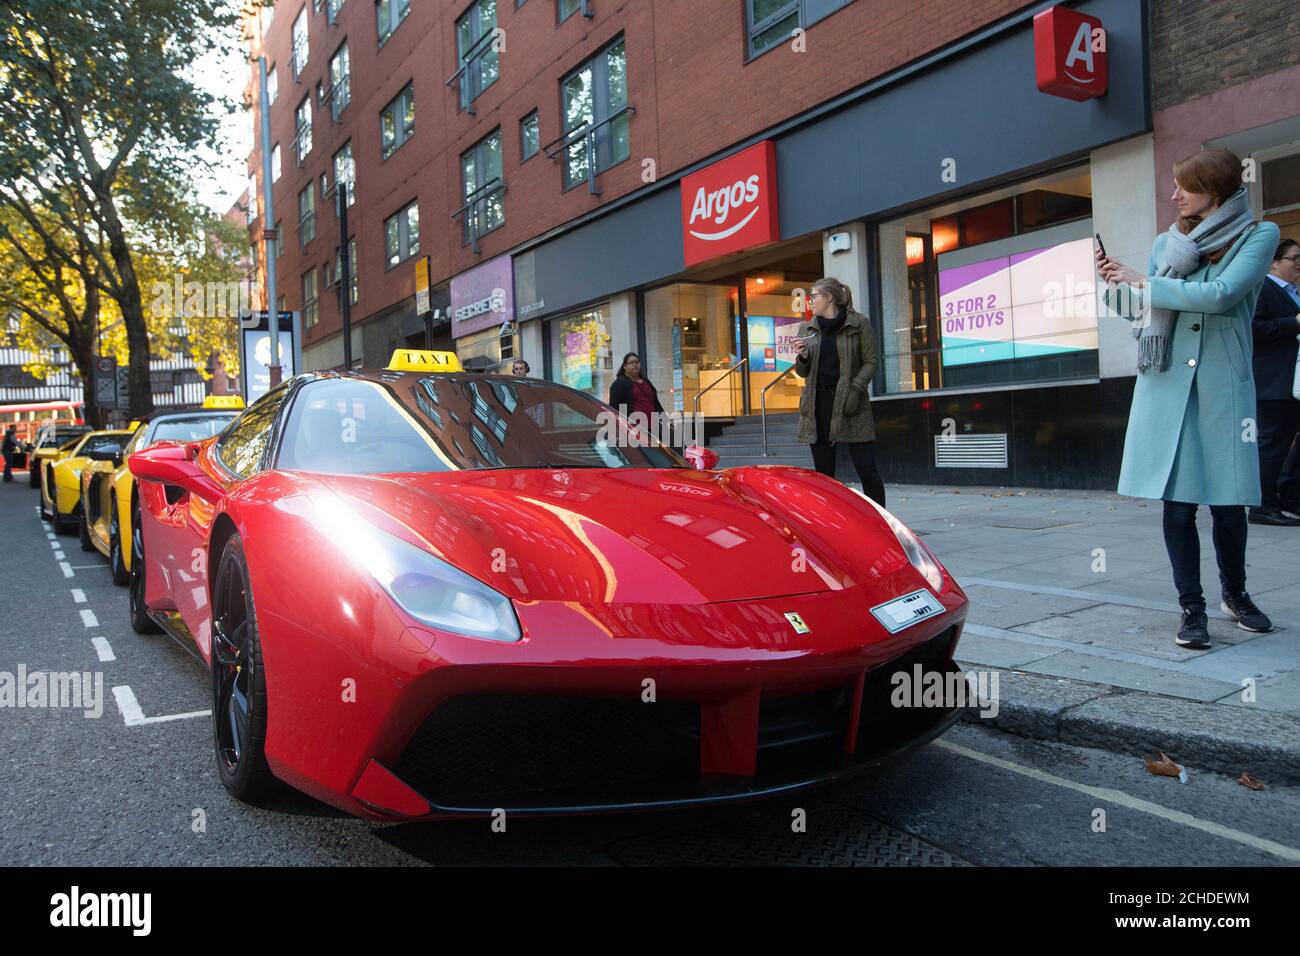 EMBARGOED TO 0001 TUESDAY OCTOBER 2 EDITORIAL USE ONLY A Ferrari 488 Spyder  lines up outside Argos, alongside an Audi R8 V10 Plus Spider and a  Lamborghini Aventador, waiting to chauffeur home